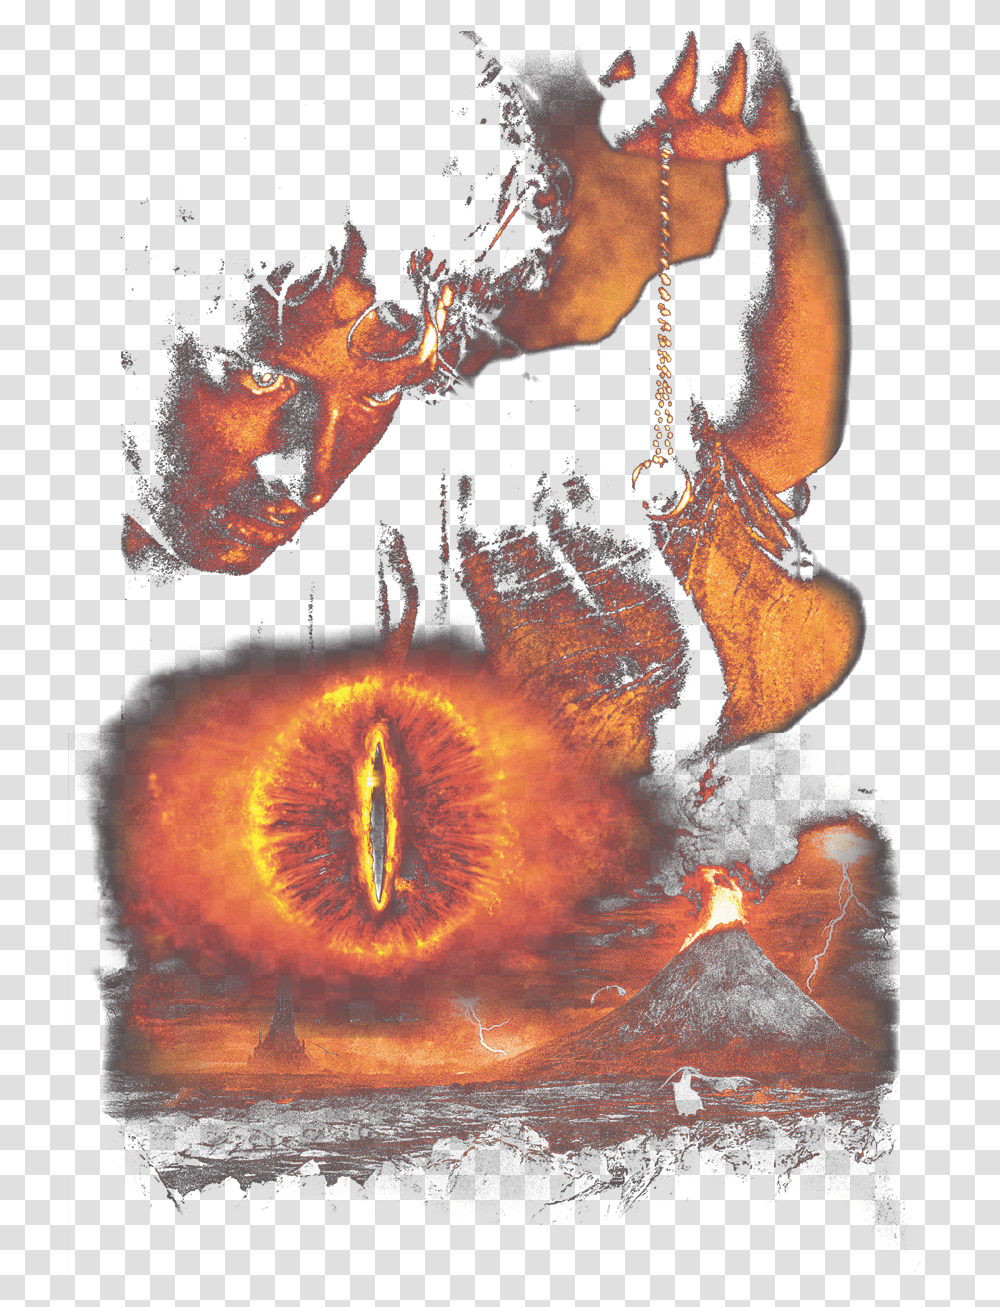 Sauron Eye Gif Background, Outdoors, Nature, Mountain, Fire Transparent Png